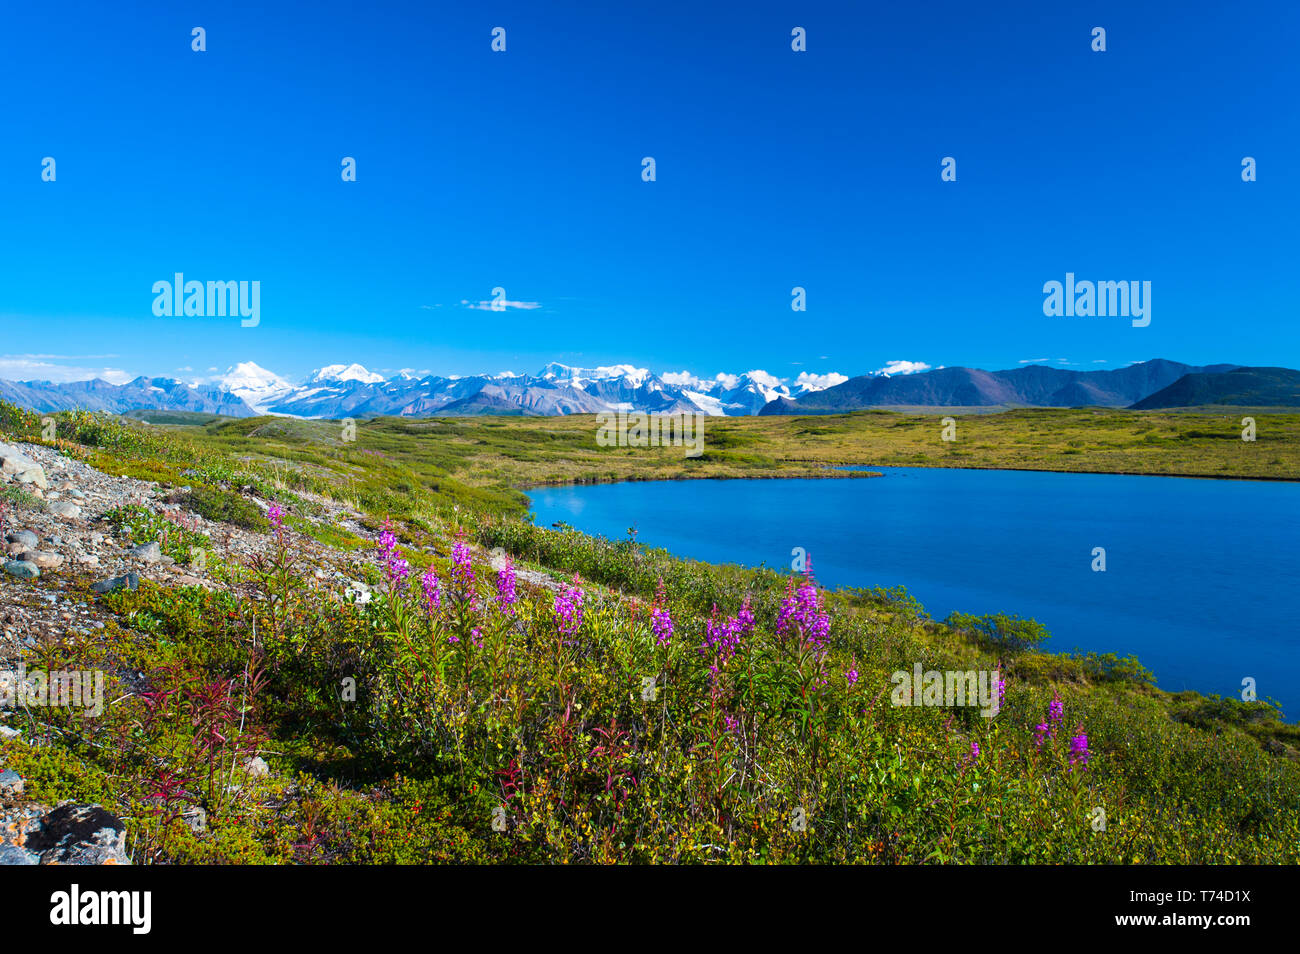 The Alaska Range as seen from the McLaren Ridge Trail off the Alaska Highway on a sunny, summer day in South-central Alaska Stock Photo